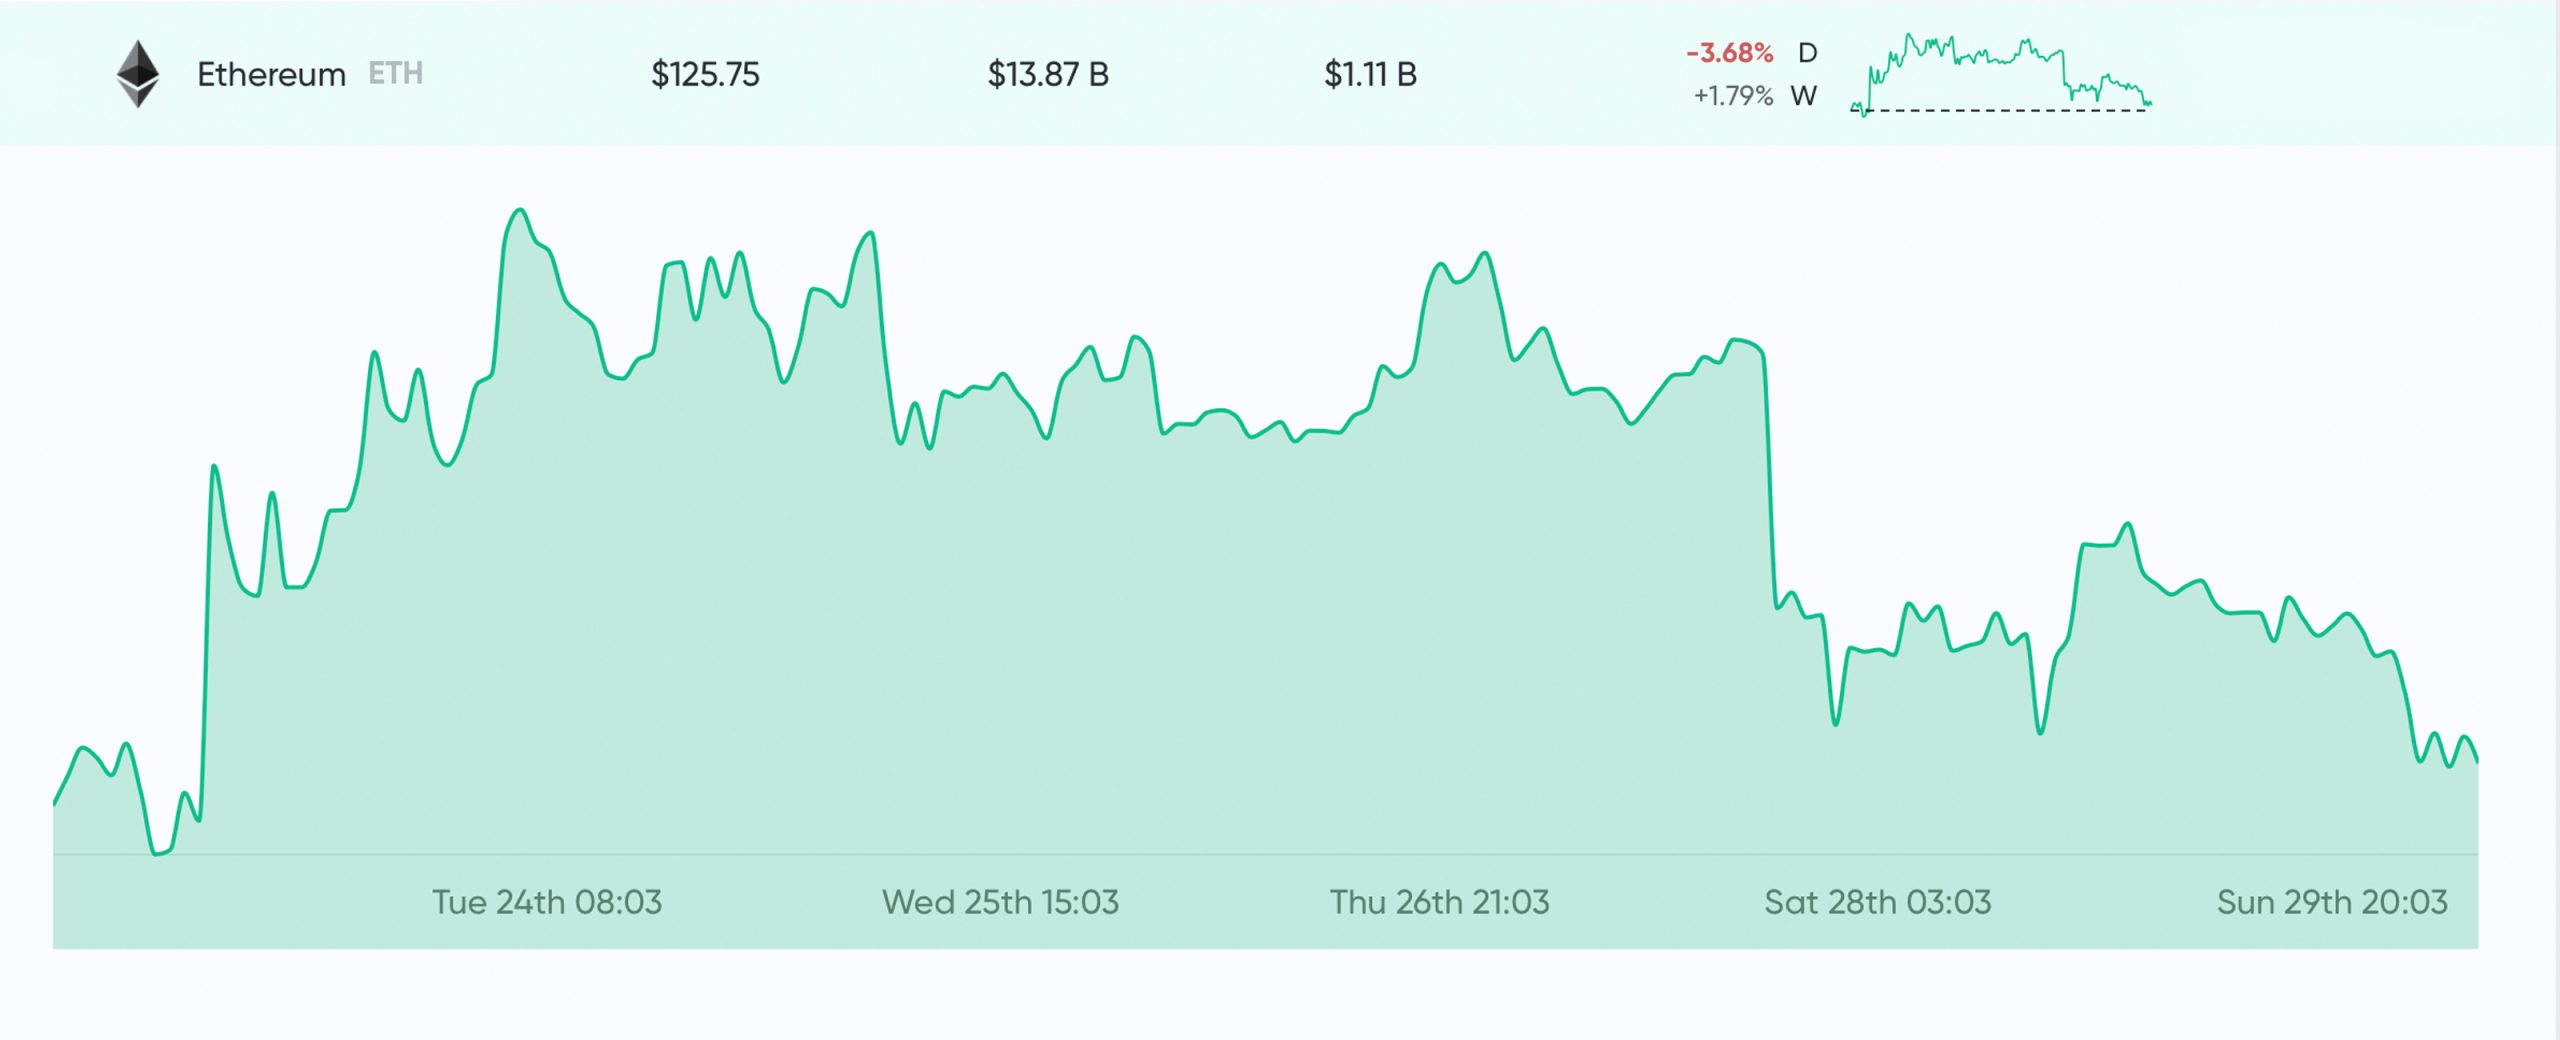 Market Update: Uncertainty Remains Thick as Bears Claw Bitcoin Price Below $6K